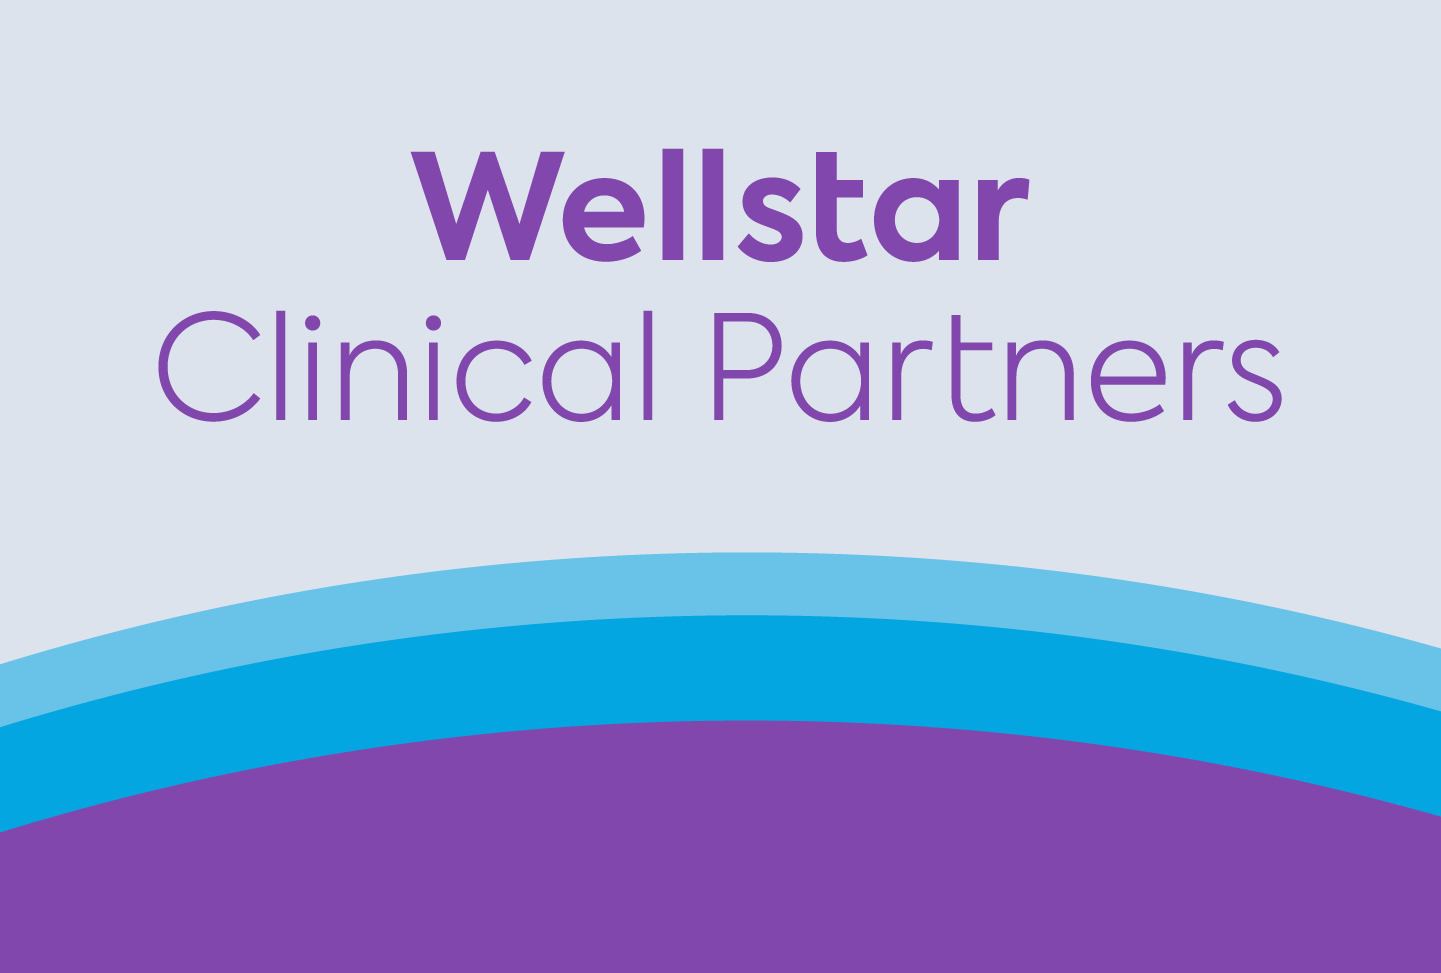 Wellstar Clinical Partners Medicare ACO Significantly Reduces Cost for Patients Image